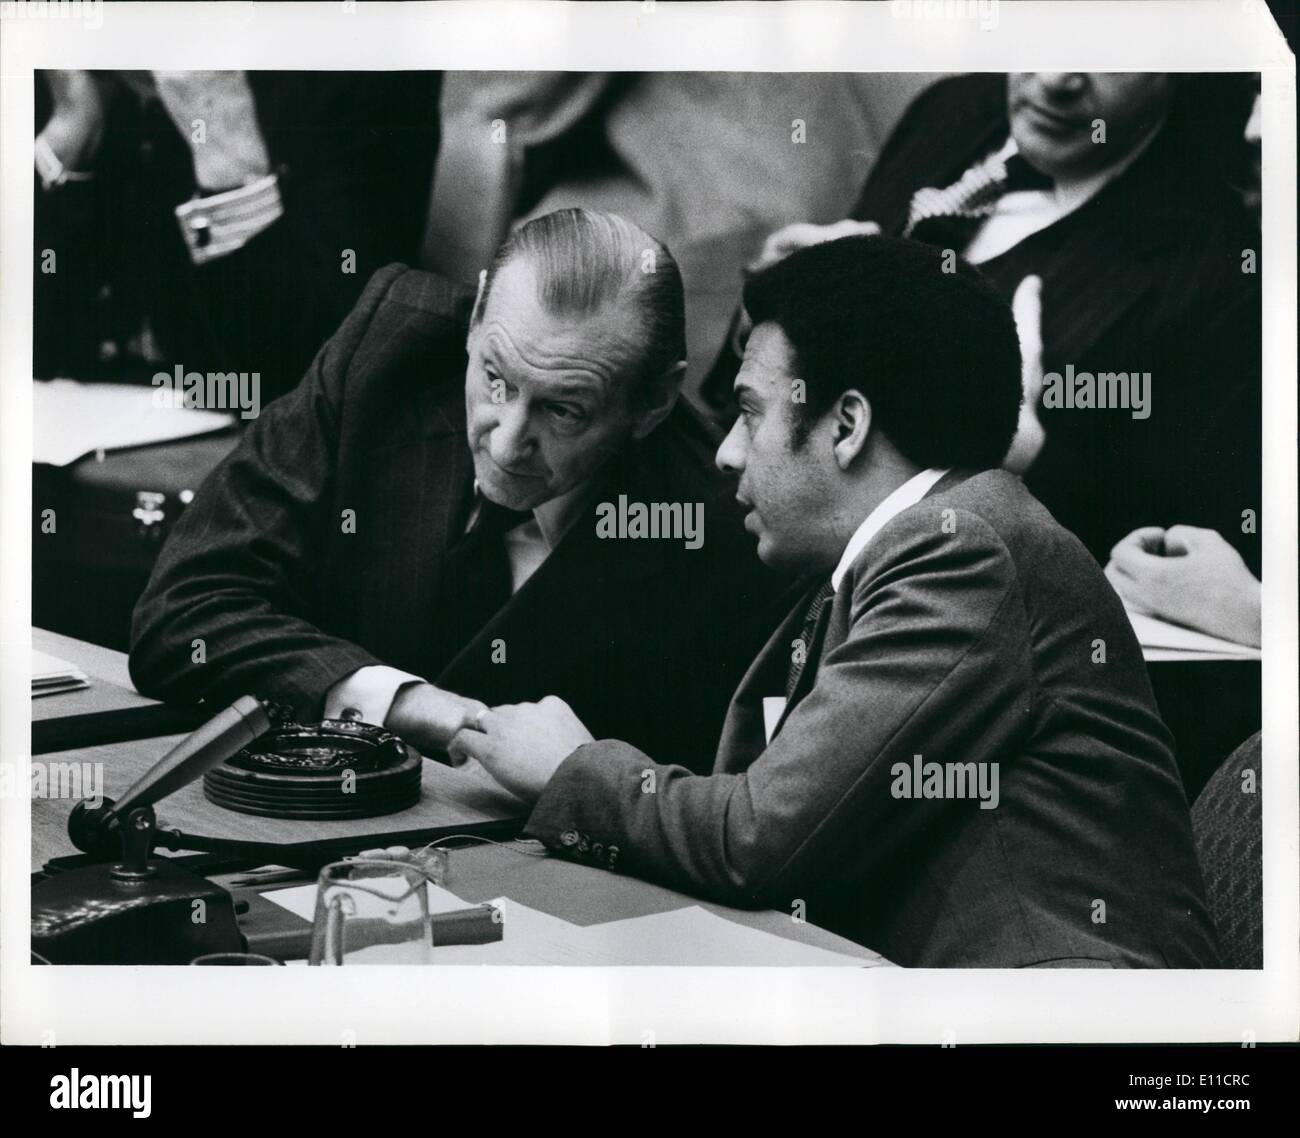 Mar. 03, 1977 - UN Security Council meeting on the problem of South Africa - President of the Security council during March 1977 Ambassador Andrew Young. Stock Photo